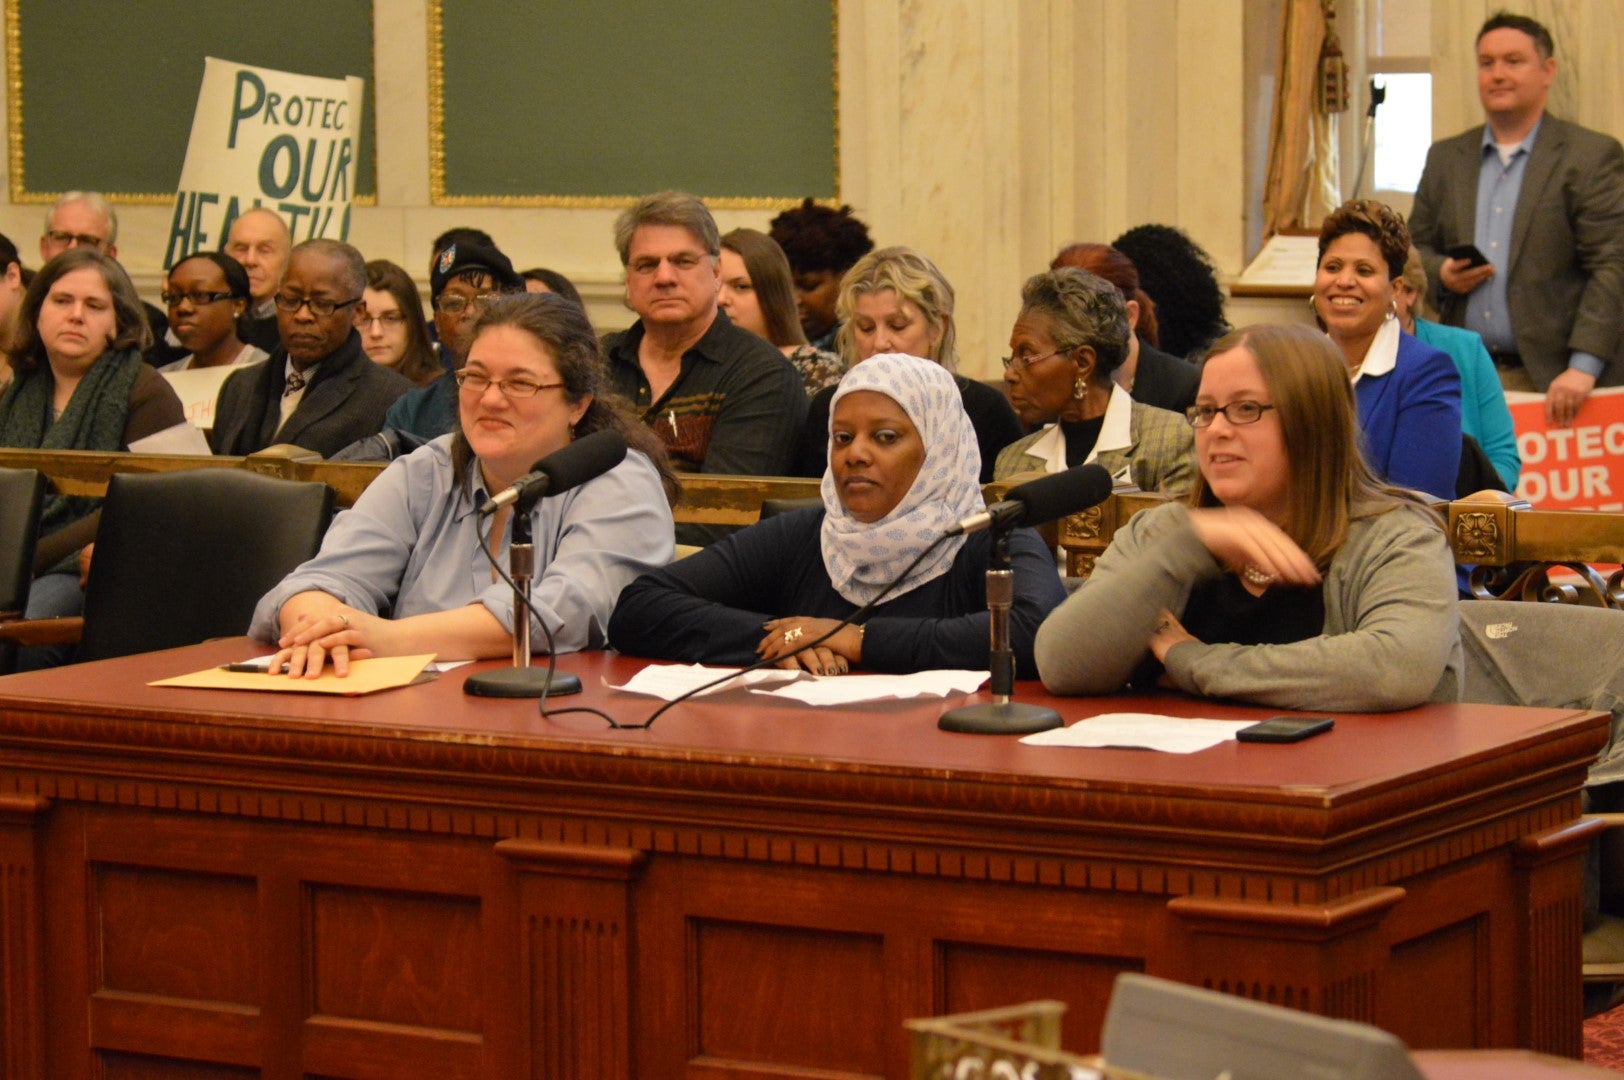  Homecare worker Kaliena Stewart (center) testifies at hearing Monday before a City Council panel. (Tom MacDonald, WHYY) 